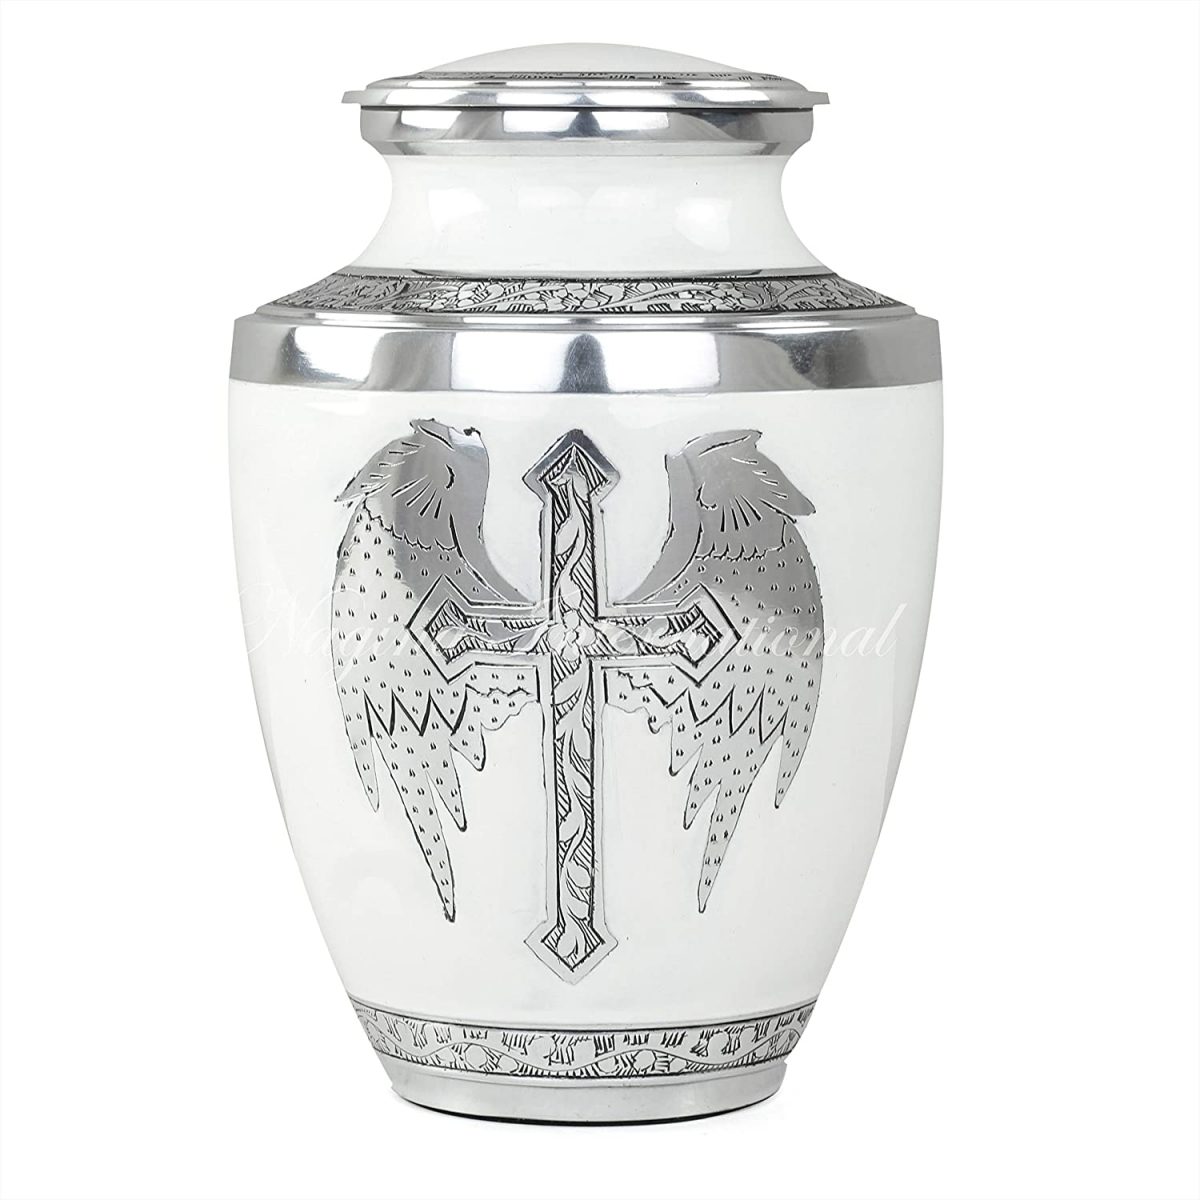 10" Aluminum Decorative Funeral Urns For Cremated Human Ash Remains Storage | Beautiful Funeral Pot For Pet Loss & Loved Ones | Large Size Engraved Metal Urns Premium Finish (White Silver Axe)